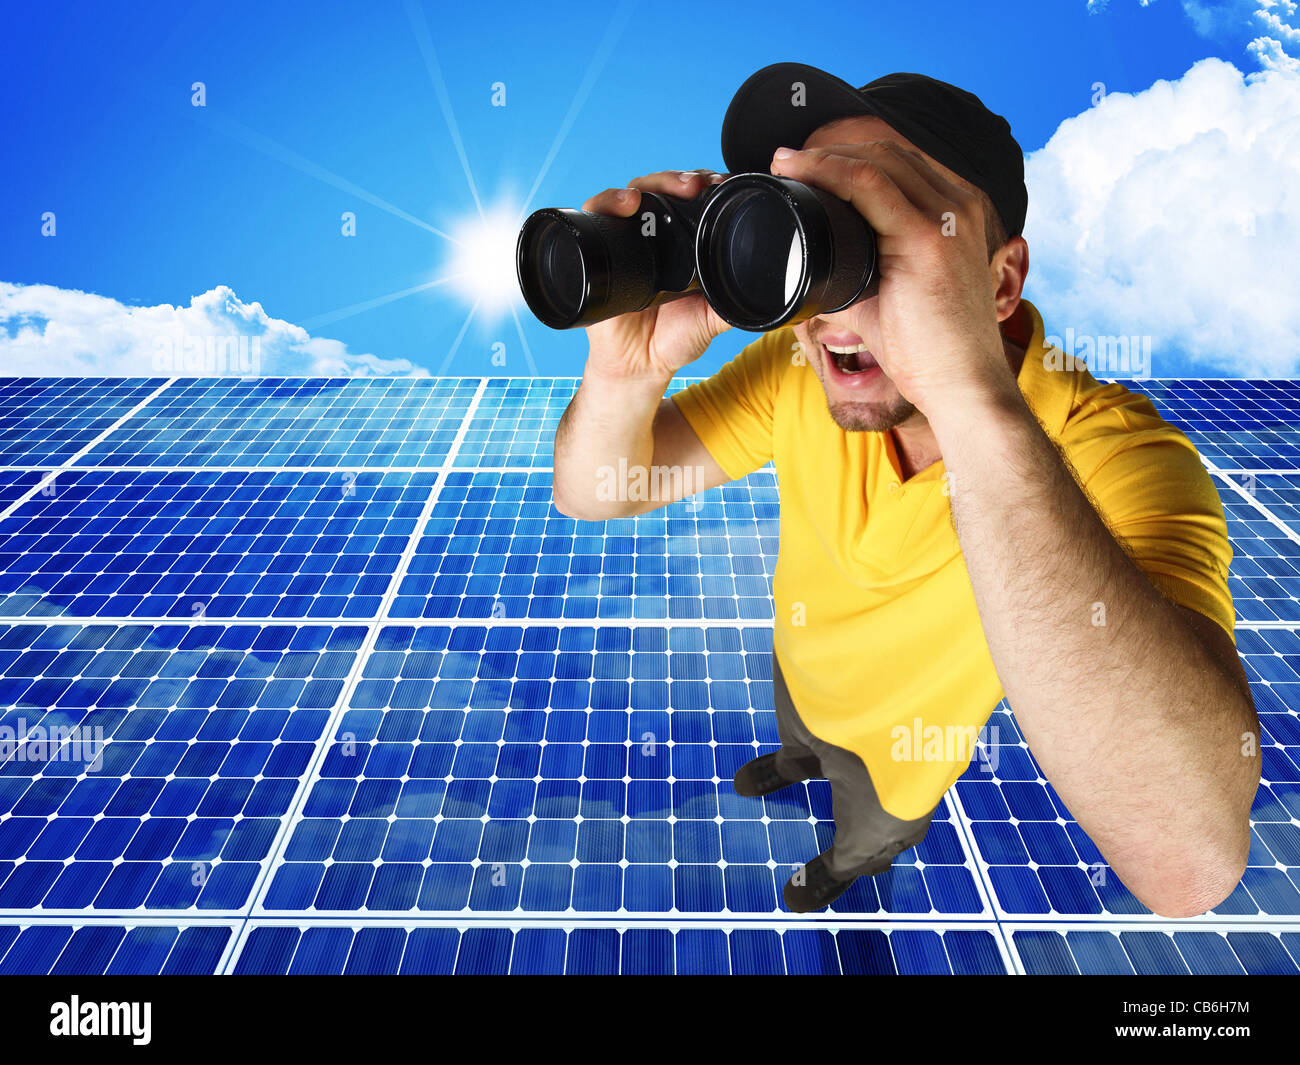 3d image of classic solar panel and man with binocular Stock Photo